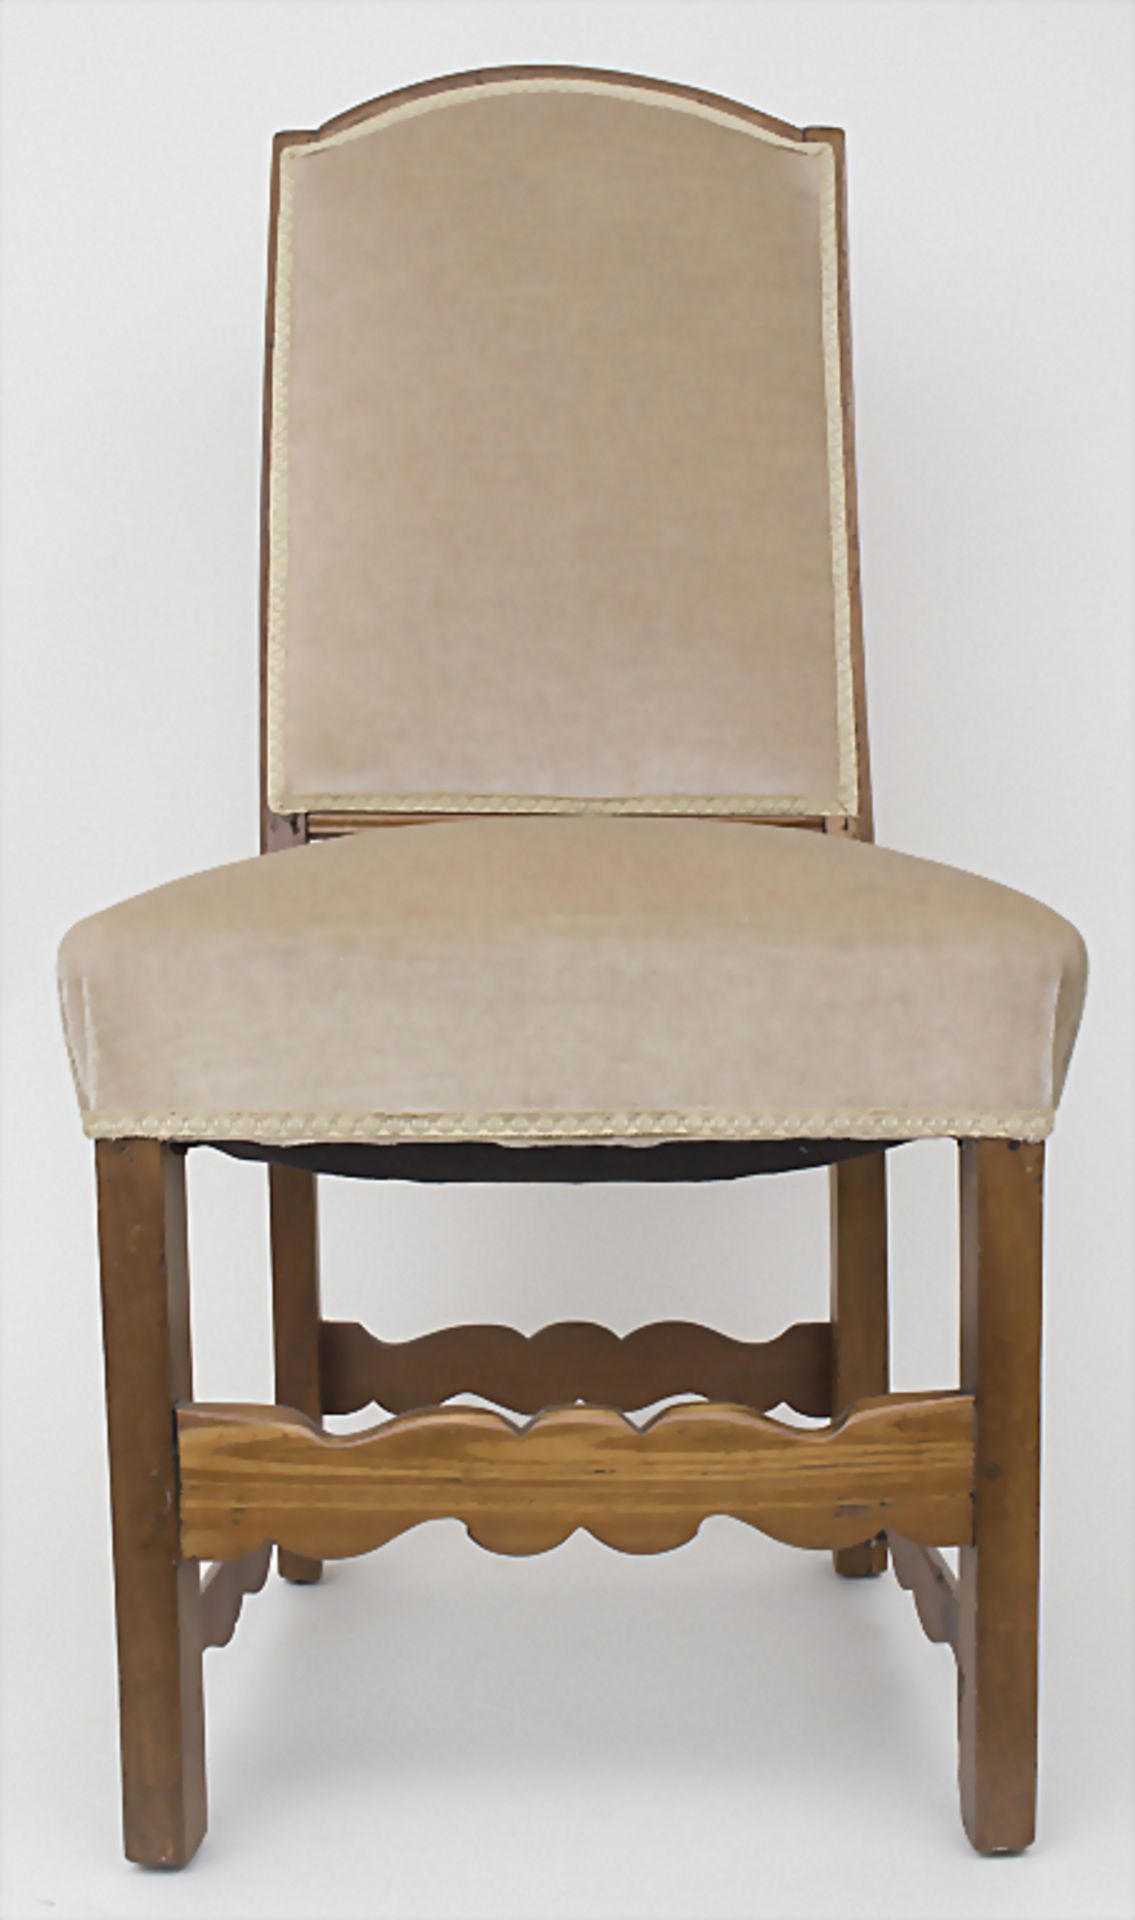 Stuhl mit Veloursbezug / A chair with velour coverMaterial: Holz, Sprungfederpolsterun